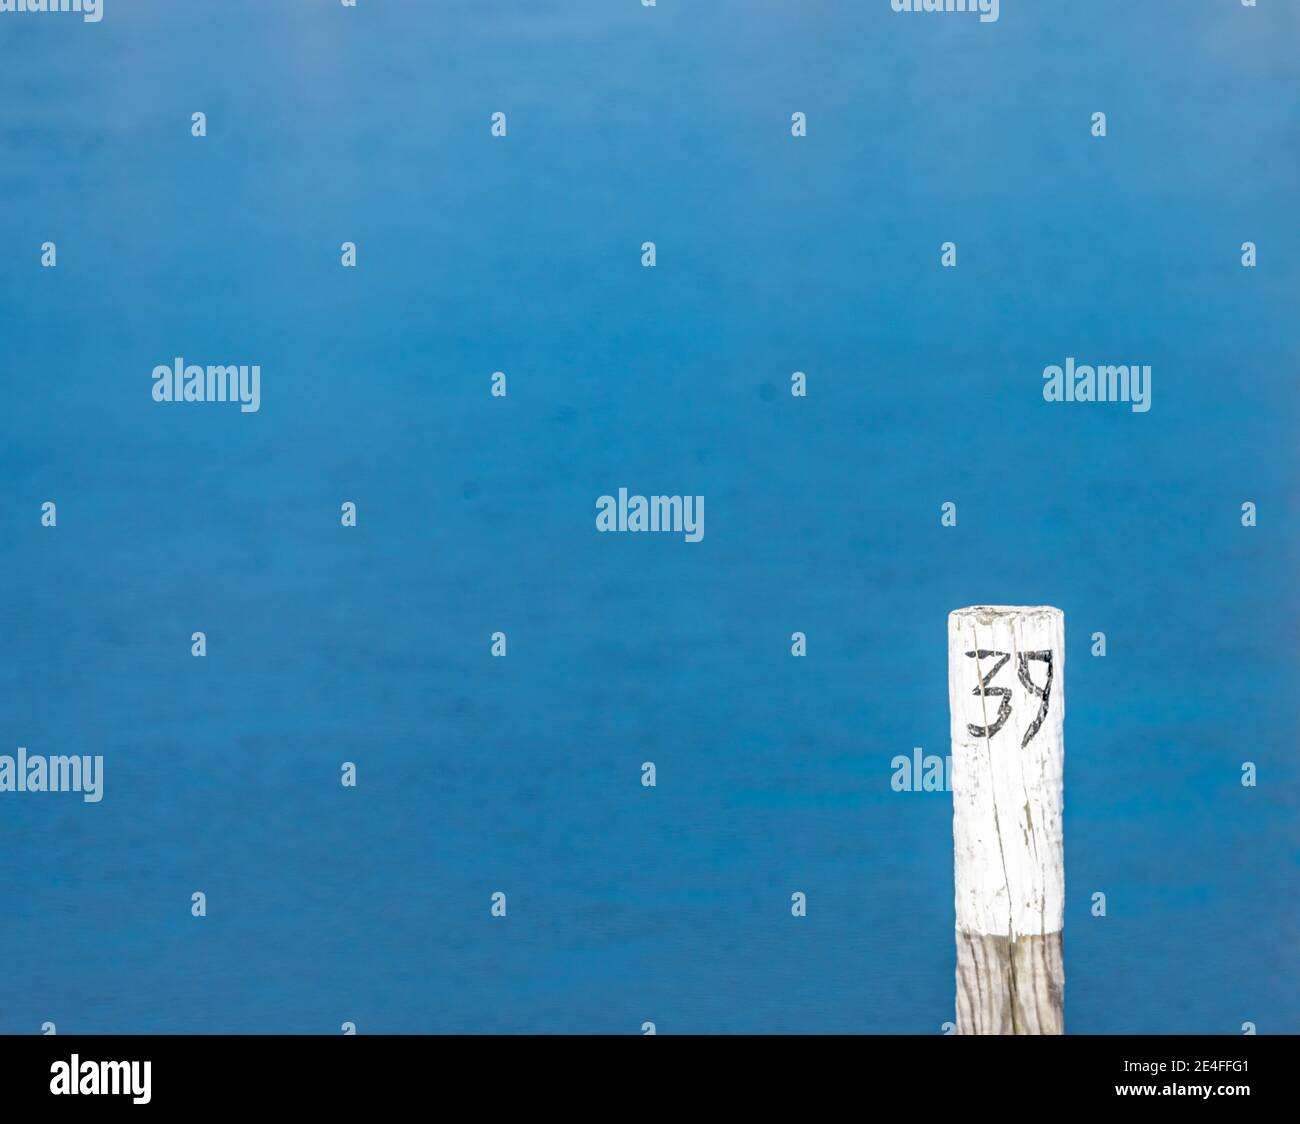 The number 39 on a post with a blue background Stock Photo